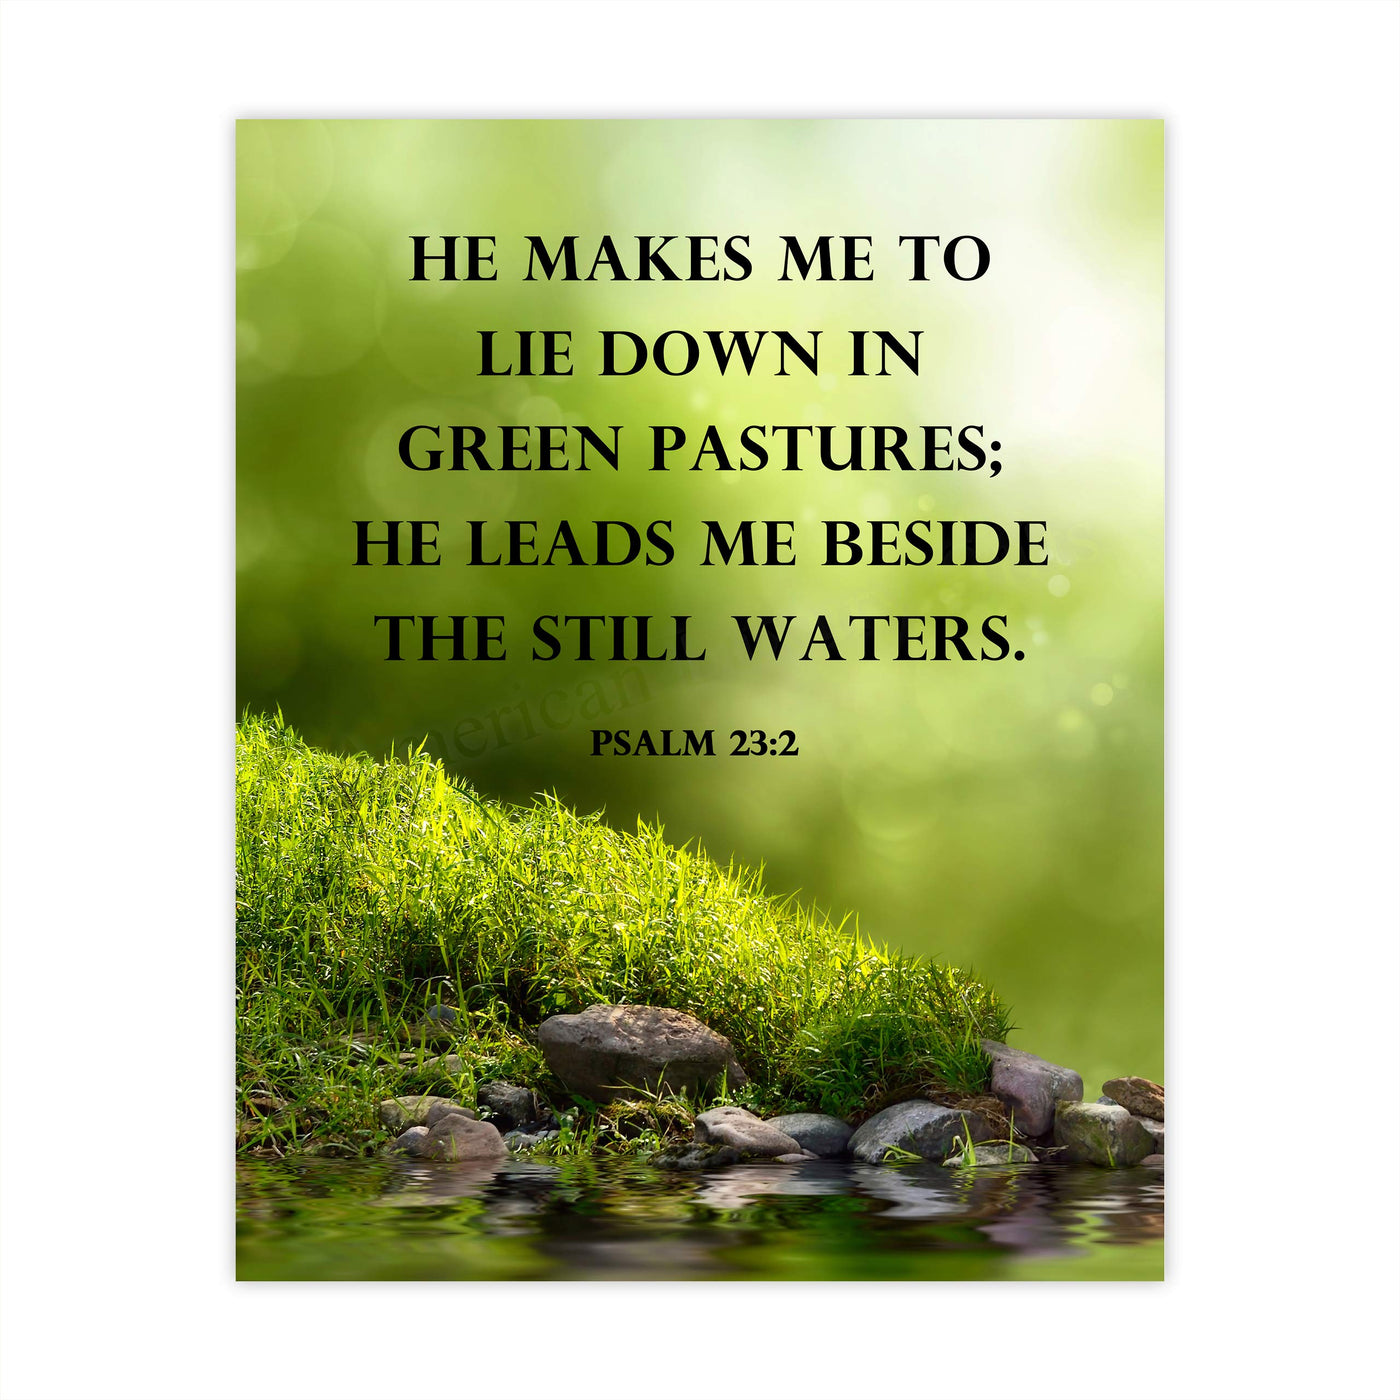 He Leads Me Beside the Still Waters-Psalms 23:2- Bible Verse Wall Art -8 x 10 Scripture Wall Print- Ready to Frame. Religious Home-Office-Sunday School Decor. Great Christian Gift of Faith!